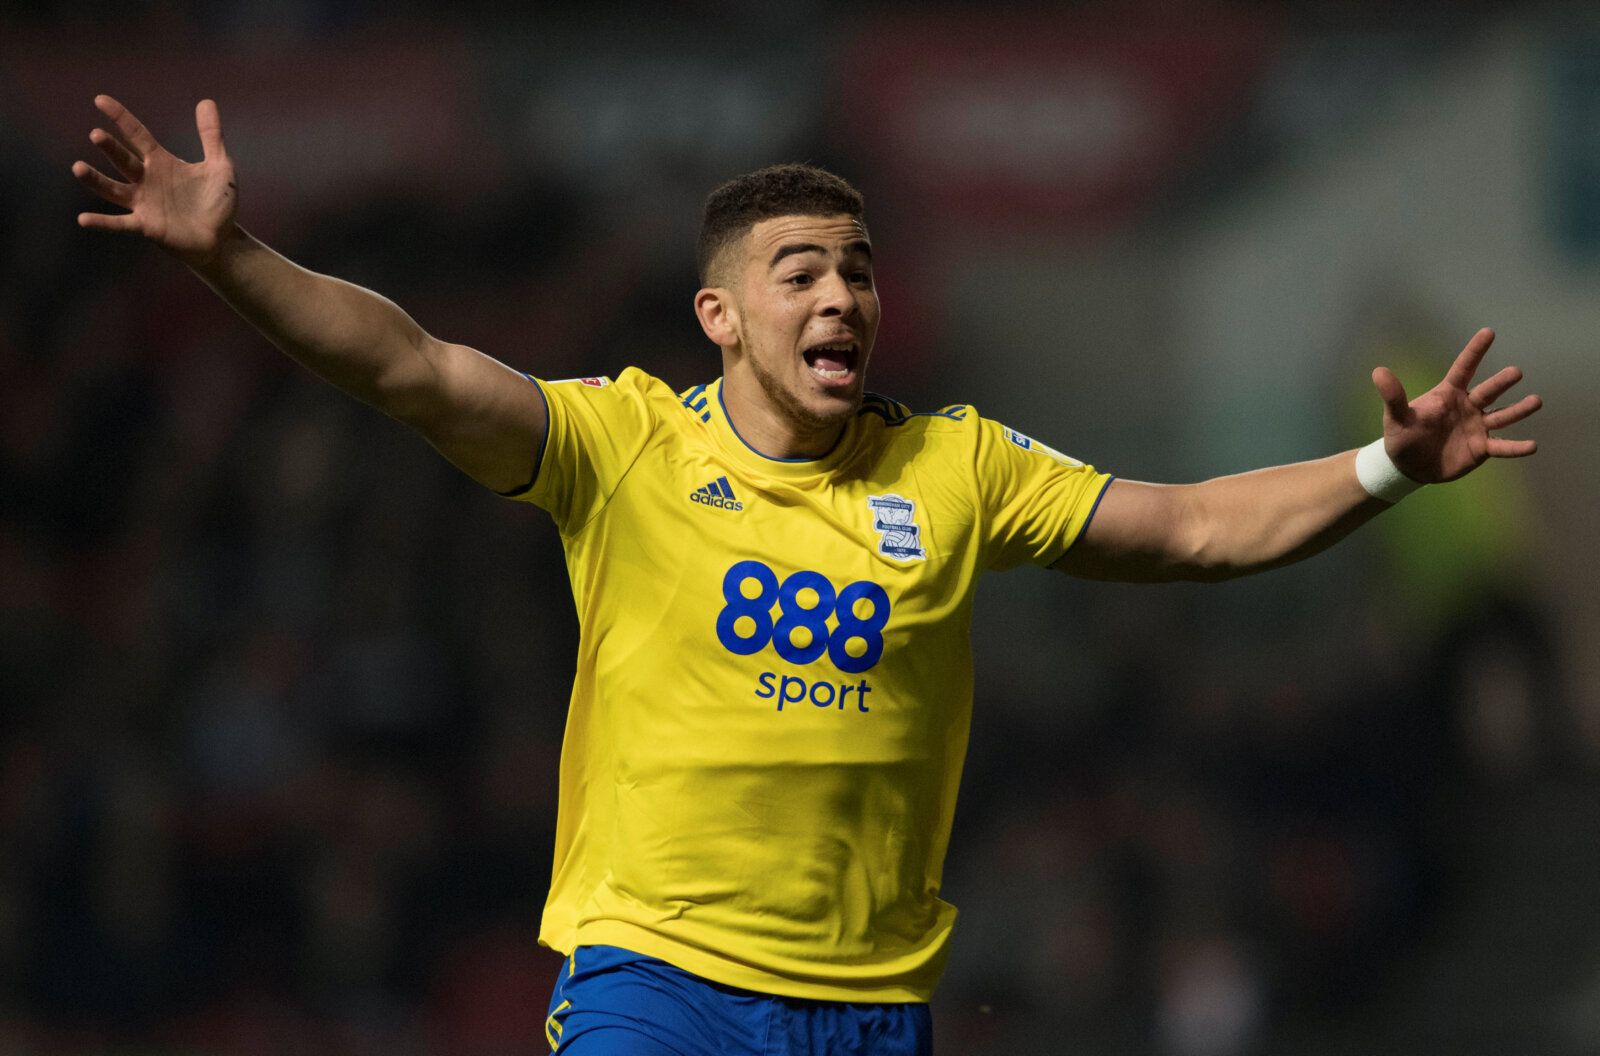 Soccer Football - Championship - Bristol City v Birmingham City - Ashton Gate Stadium, Bristol, Britain - February 26, 2019  Birmingham City’s Che Adams reacts    Action Images/Tony O'Brien  EDITORIAL USE ONLY. No use with unauthorized audio, video, data, fixture lists, club/league logos or 